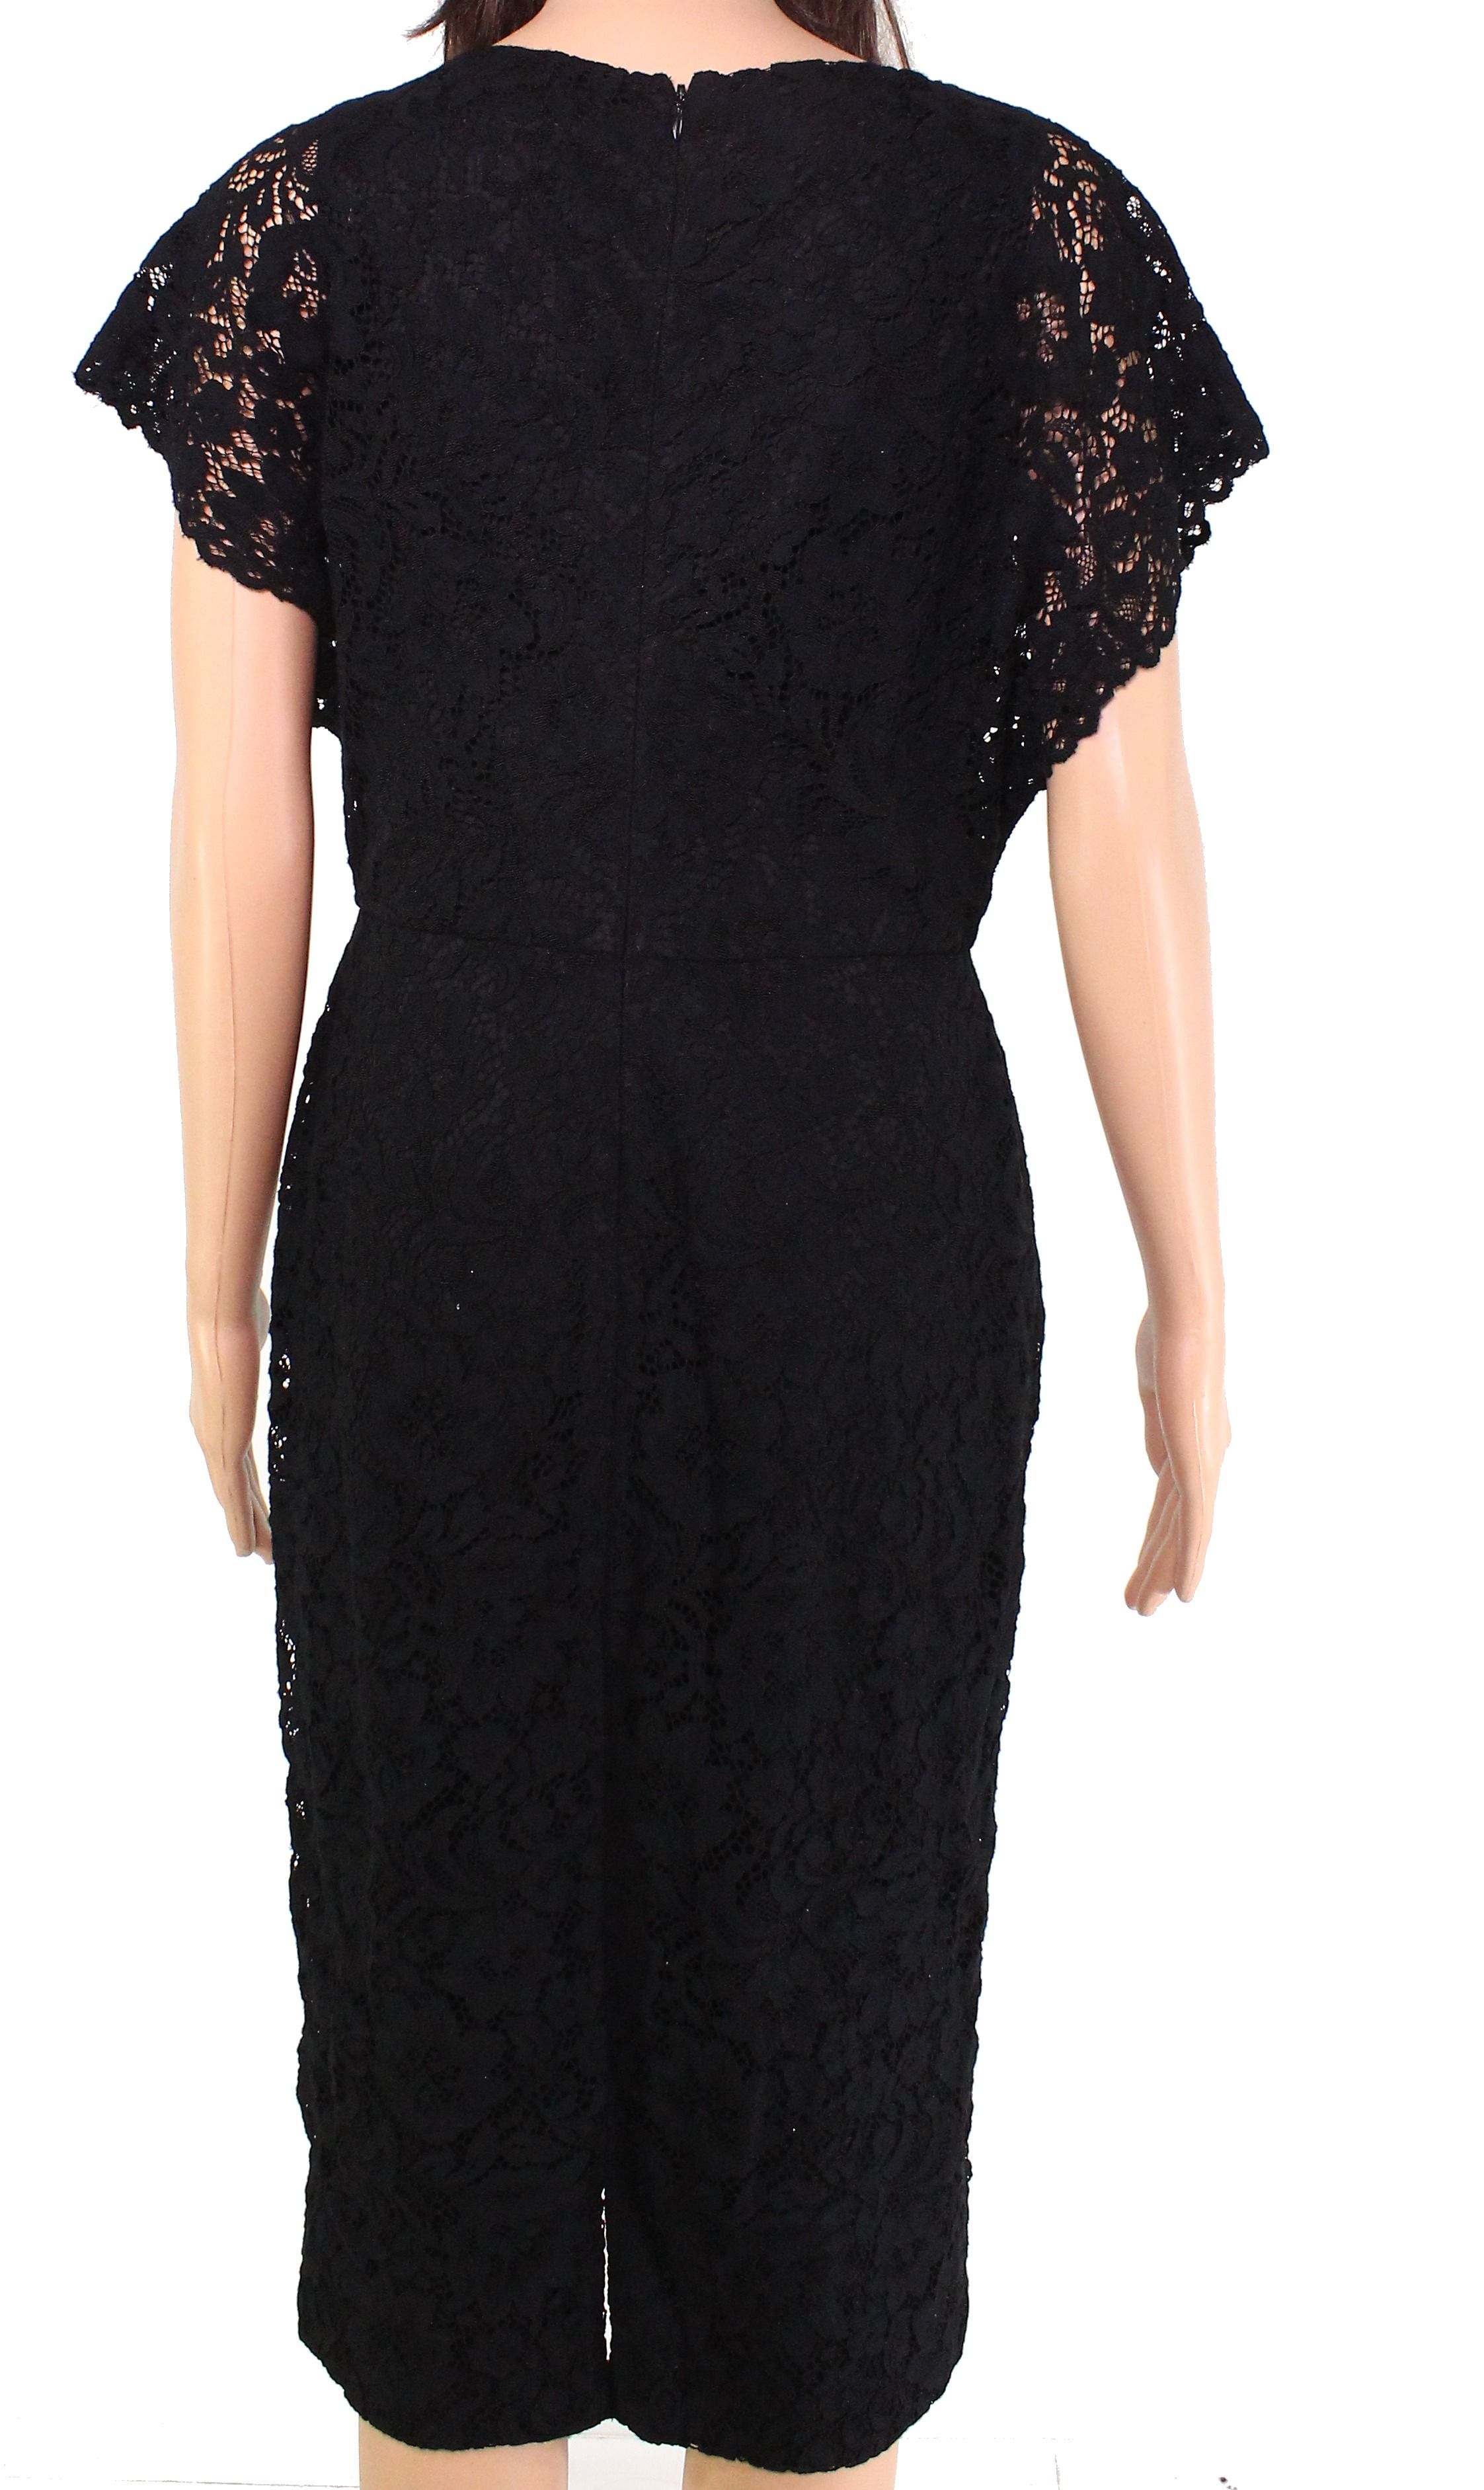 <br>Color: Blacks<br>Size Type: Regular<br>Size (Women's): 8<br>Lined: Yes<br>Sleeve Style: Cap Sleeve<br>Occasion: Party/Cocktail<br>Style: Sheath Dress<br>Look: Wedding Guest<br>Dress Length: Midi<br>Material: Rayon<br>Zipper: Back Zipper